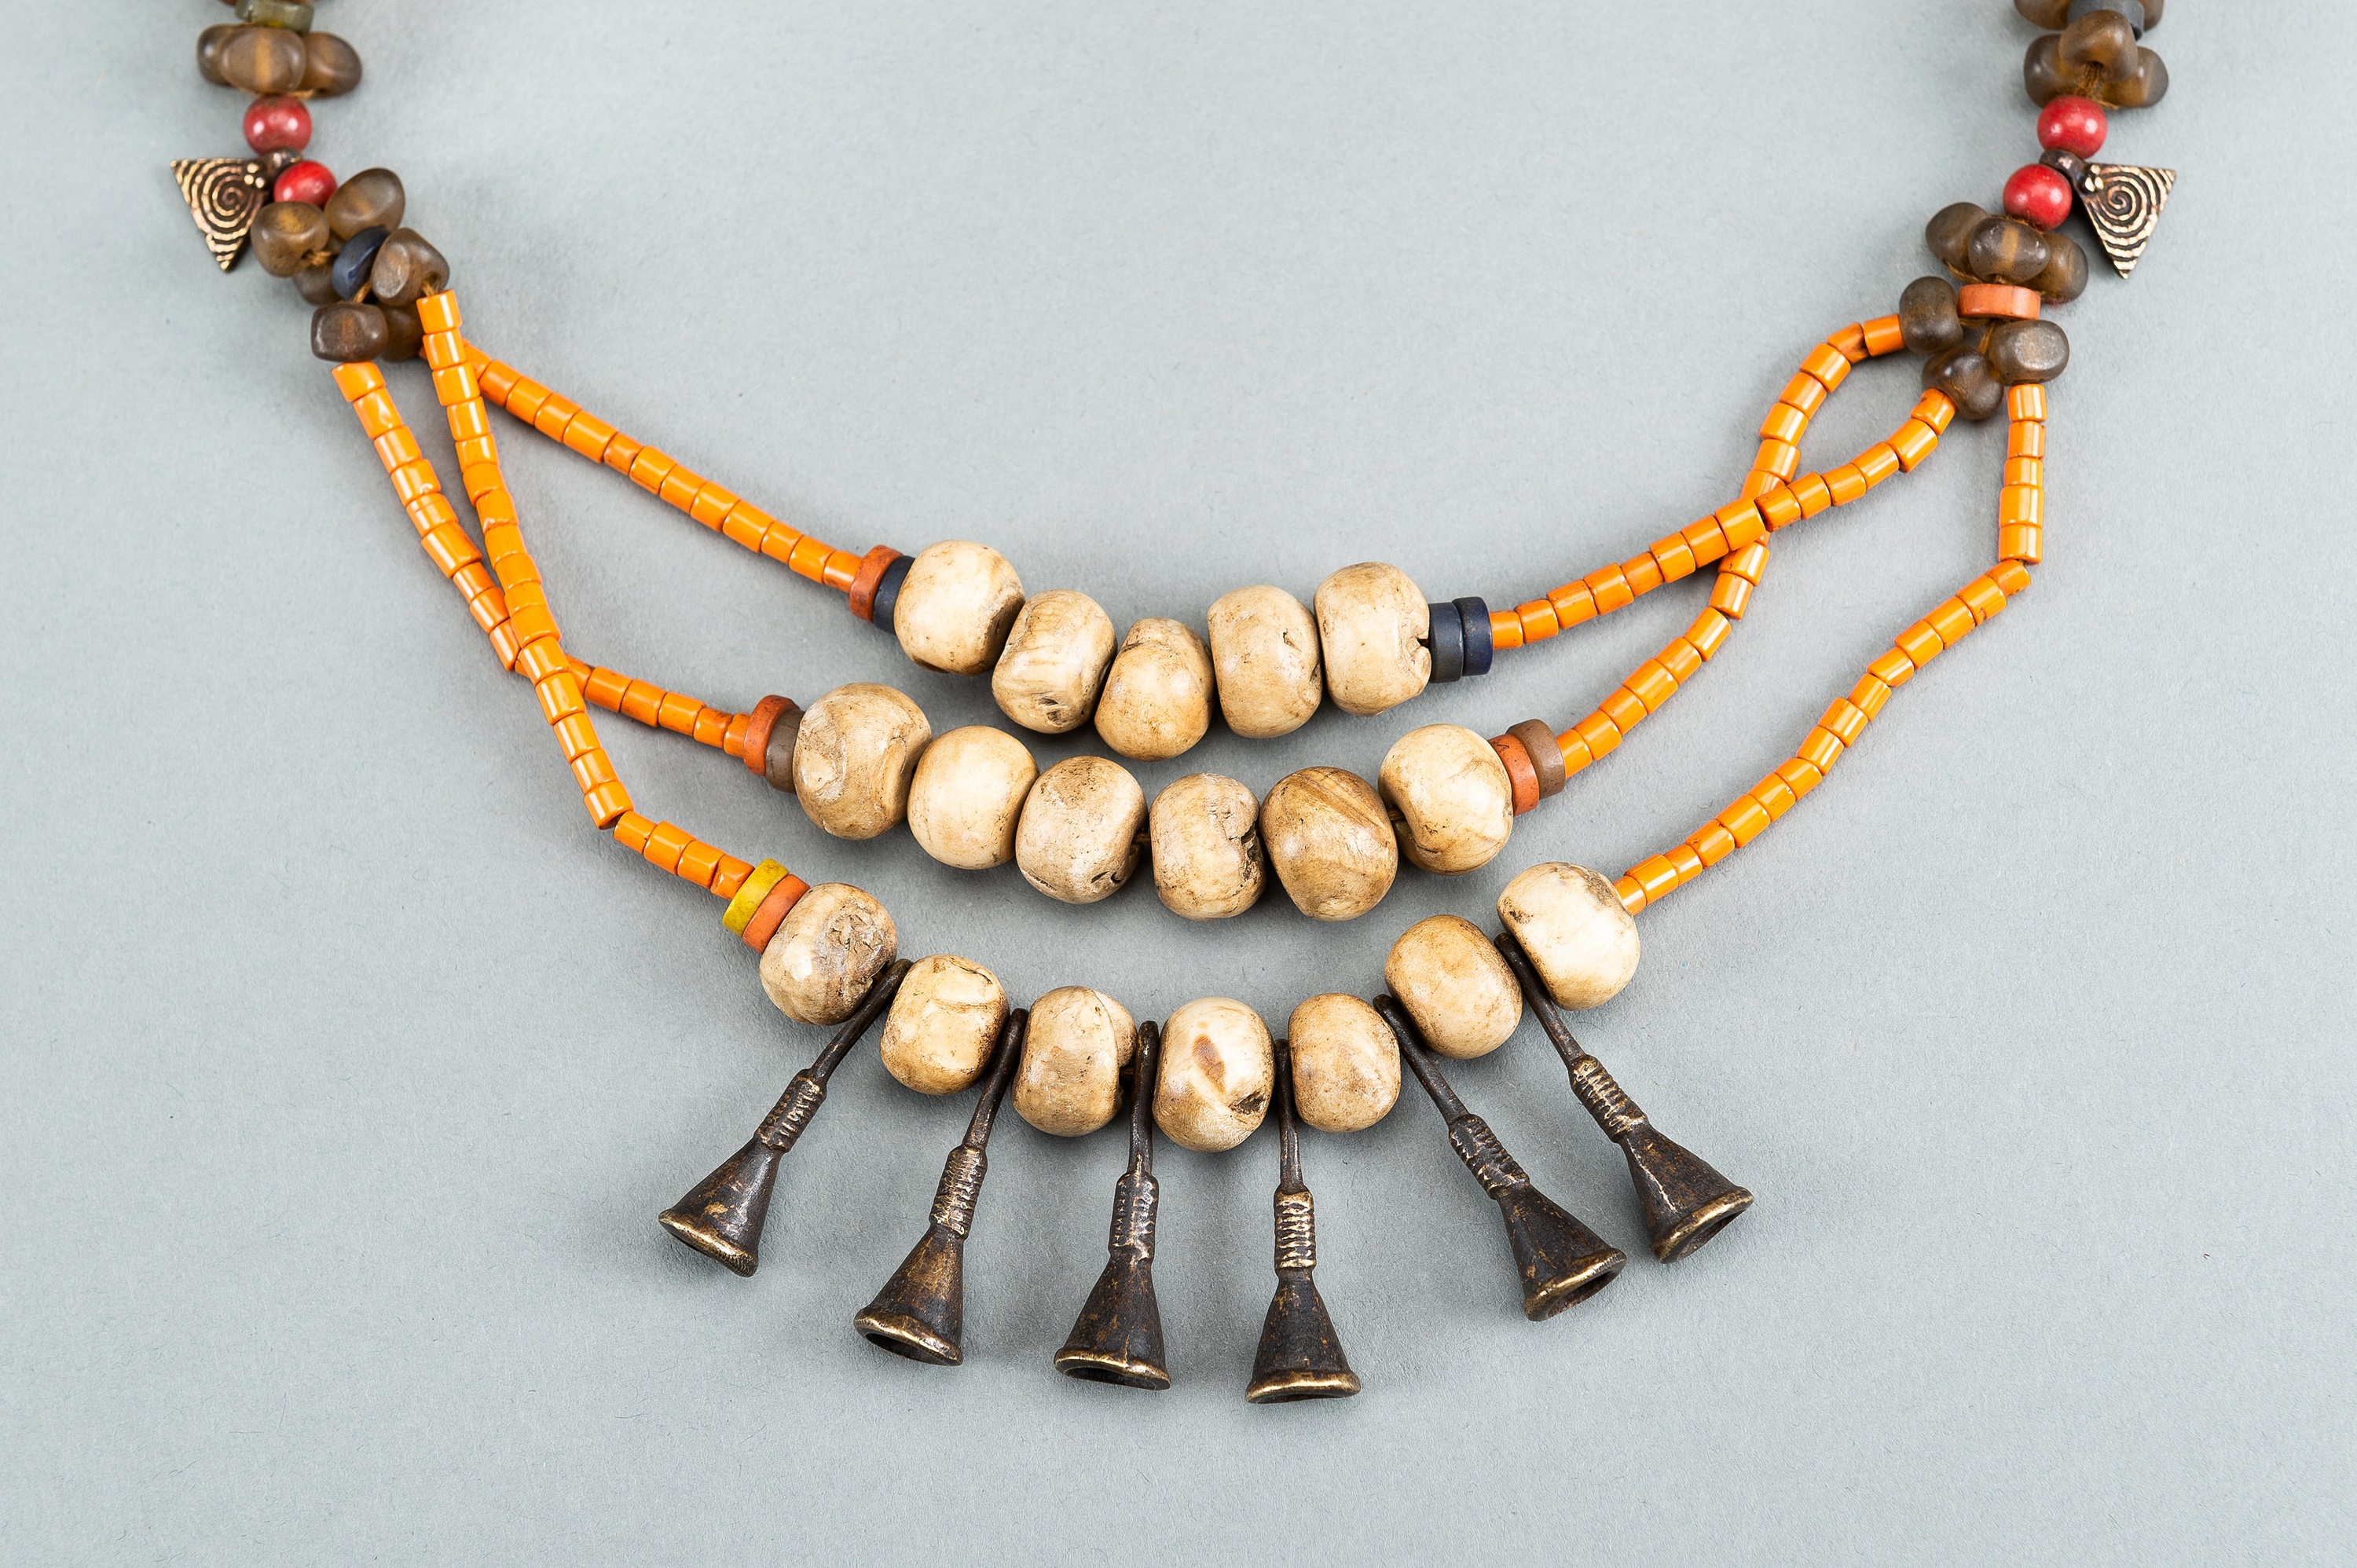 A NAGALAND MULTI-COLORED GLASS, BRASS AND SHELL NECKLACE, c. 1900s - Image 2 of 10